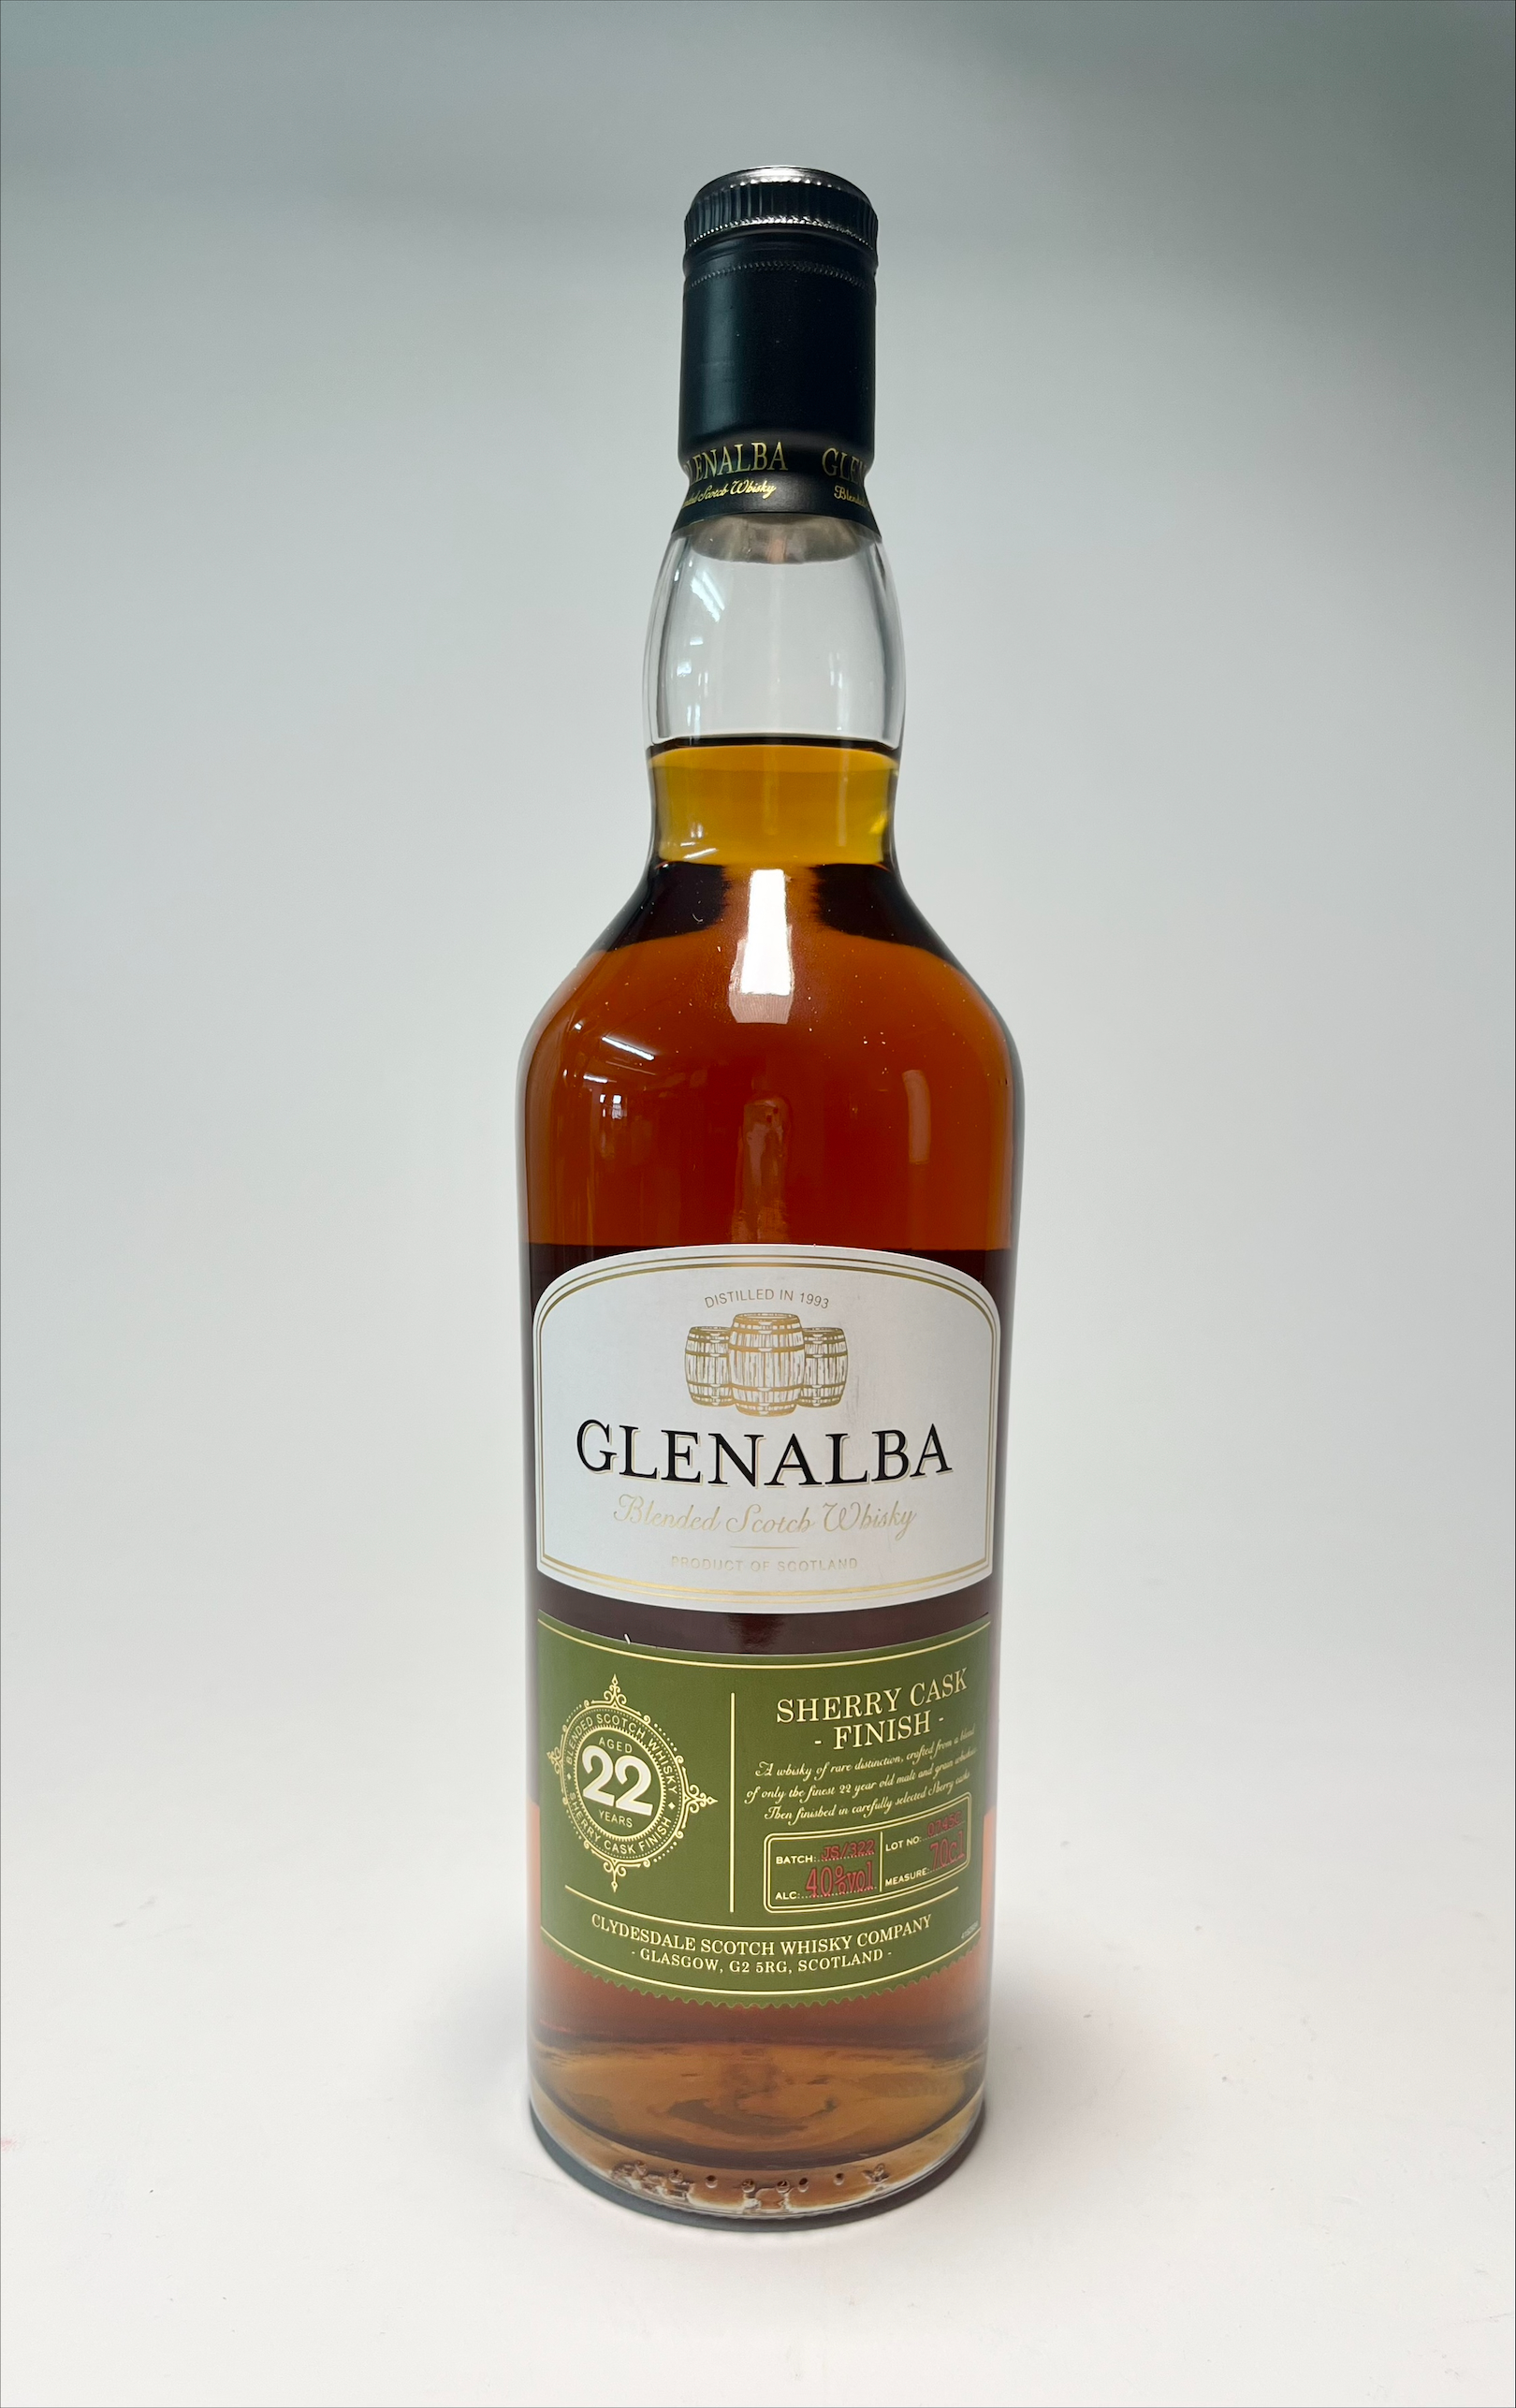 A bottle of Glenalba Blended Scotch Whisky, Sherry cask finish, aged 22 years, product of - Image 2 of 2